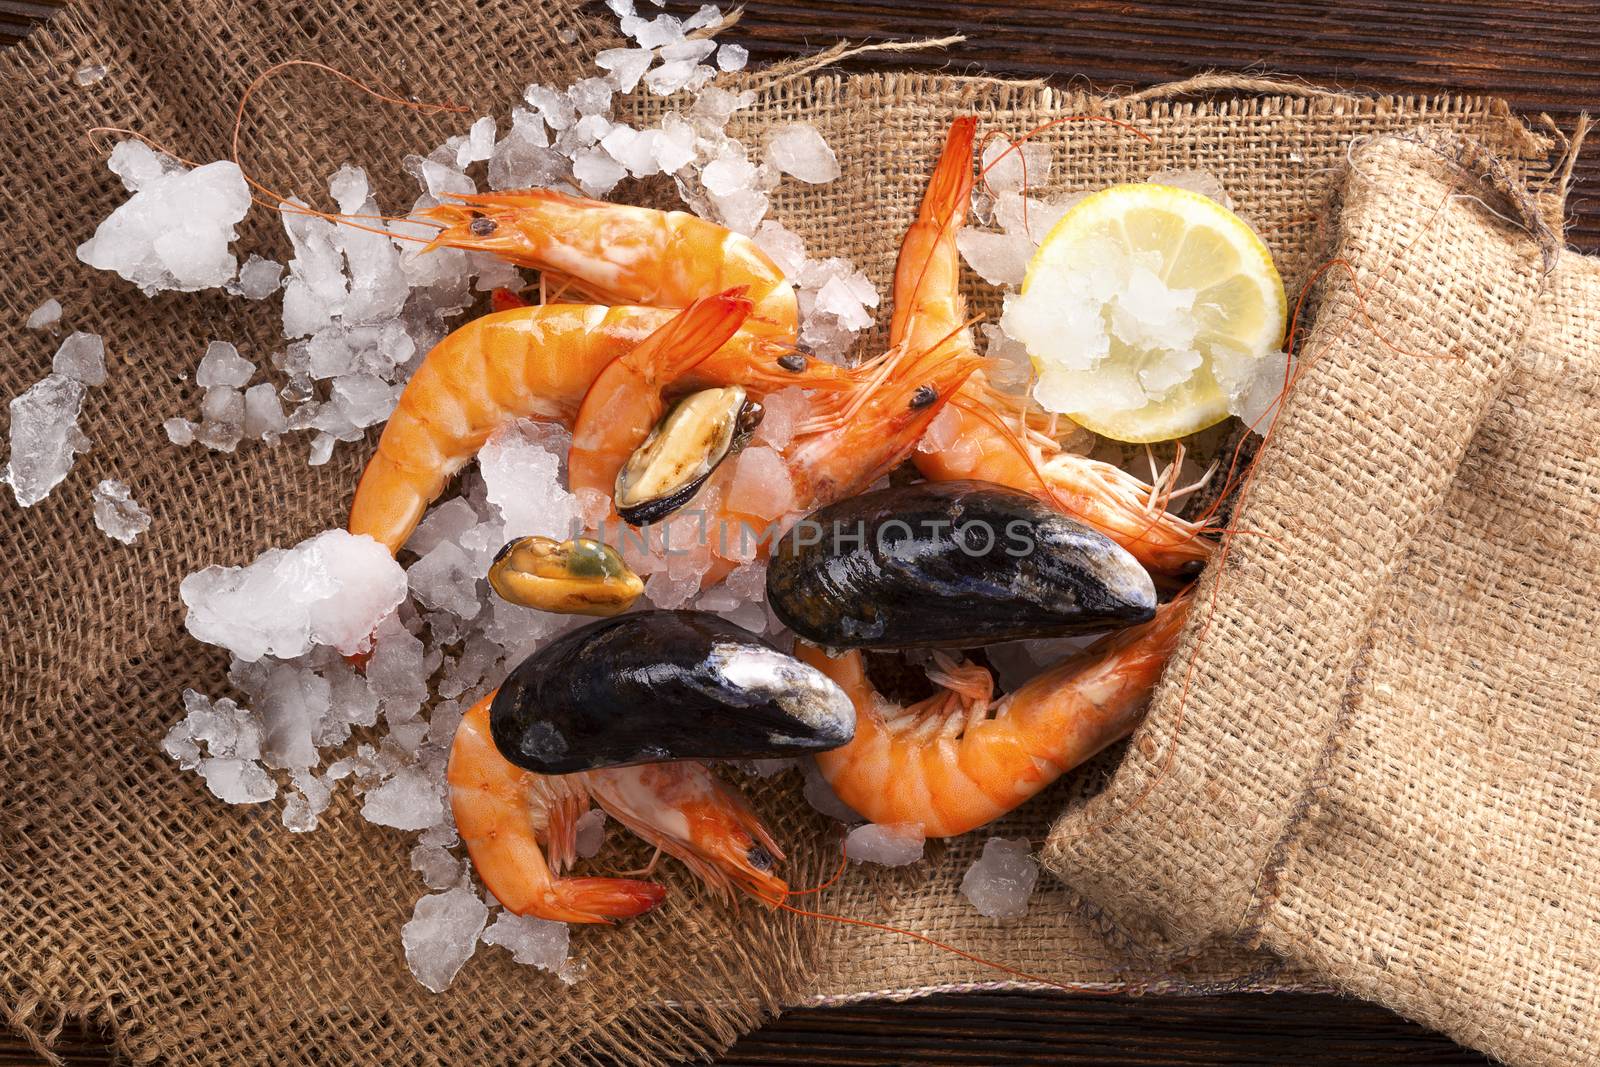 Fresh shrimp with lemon on ice in brown burlap bag on wooden table, top view. Culinary seafood eating.